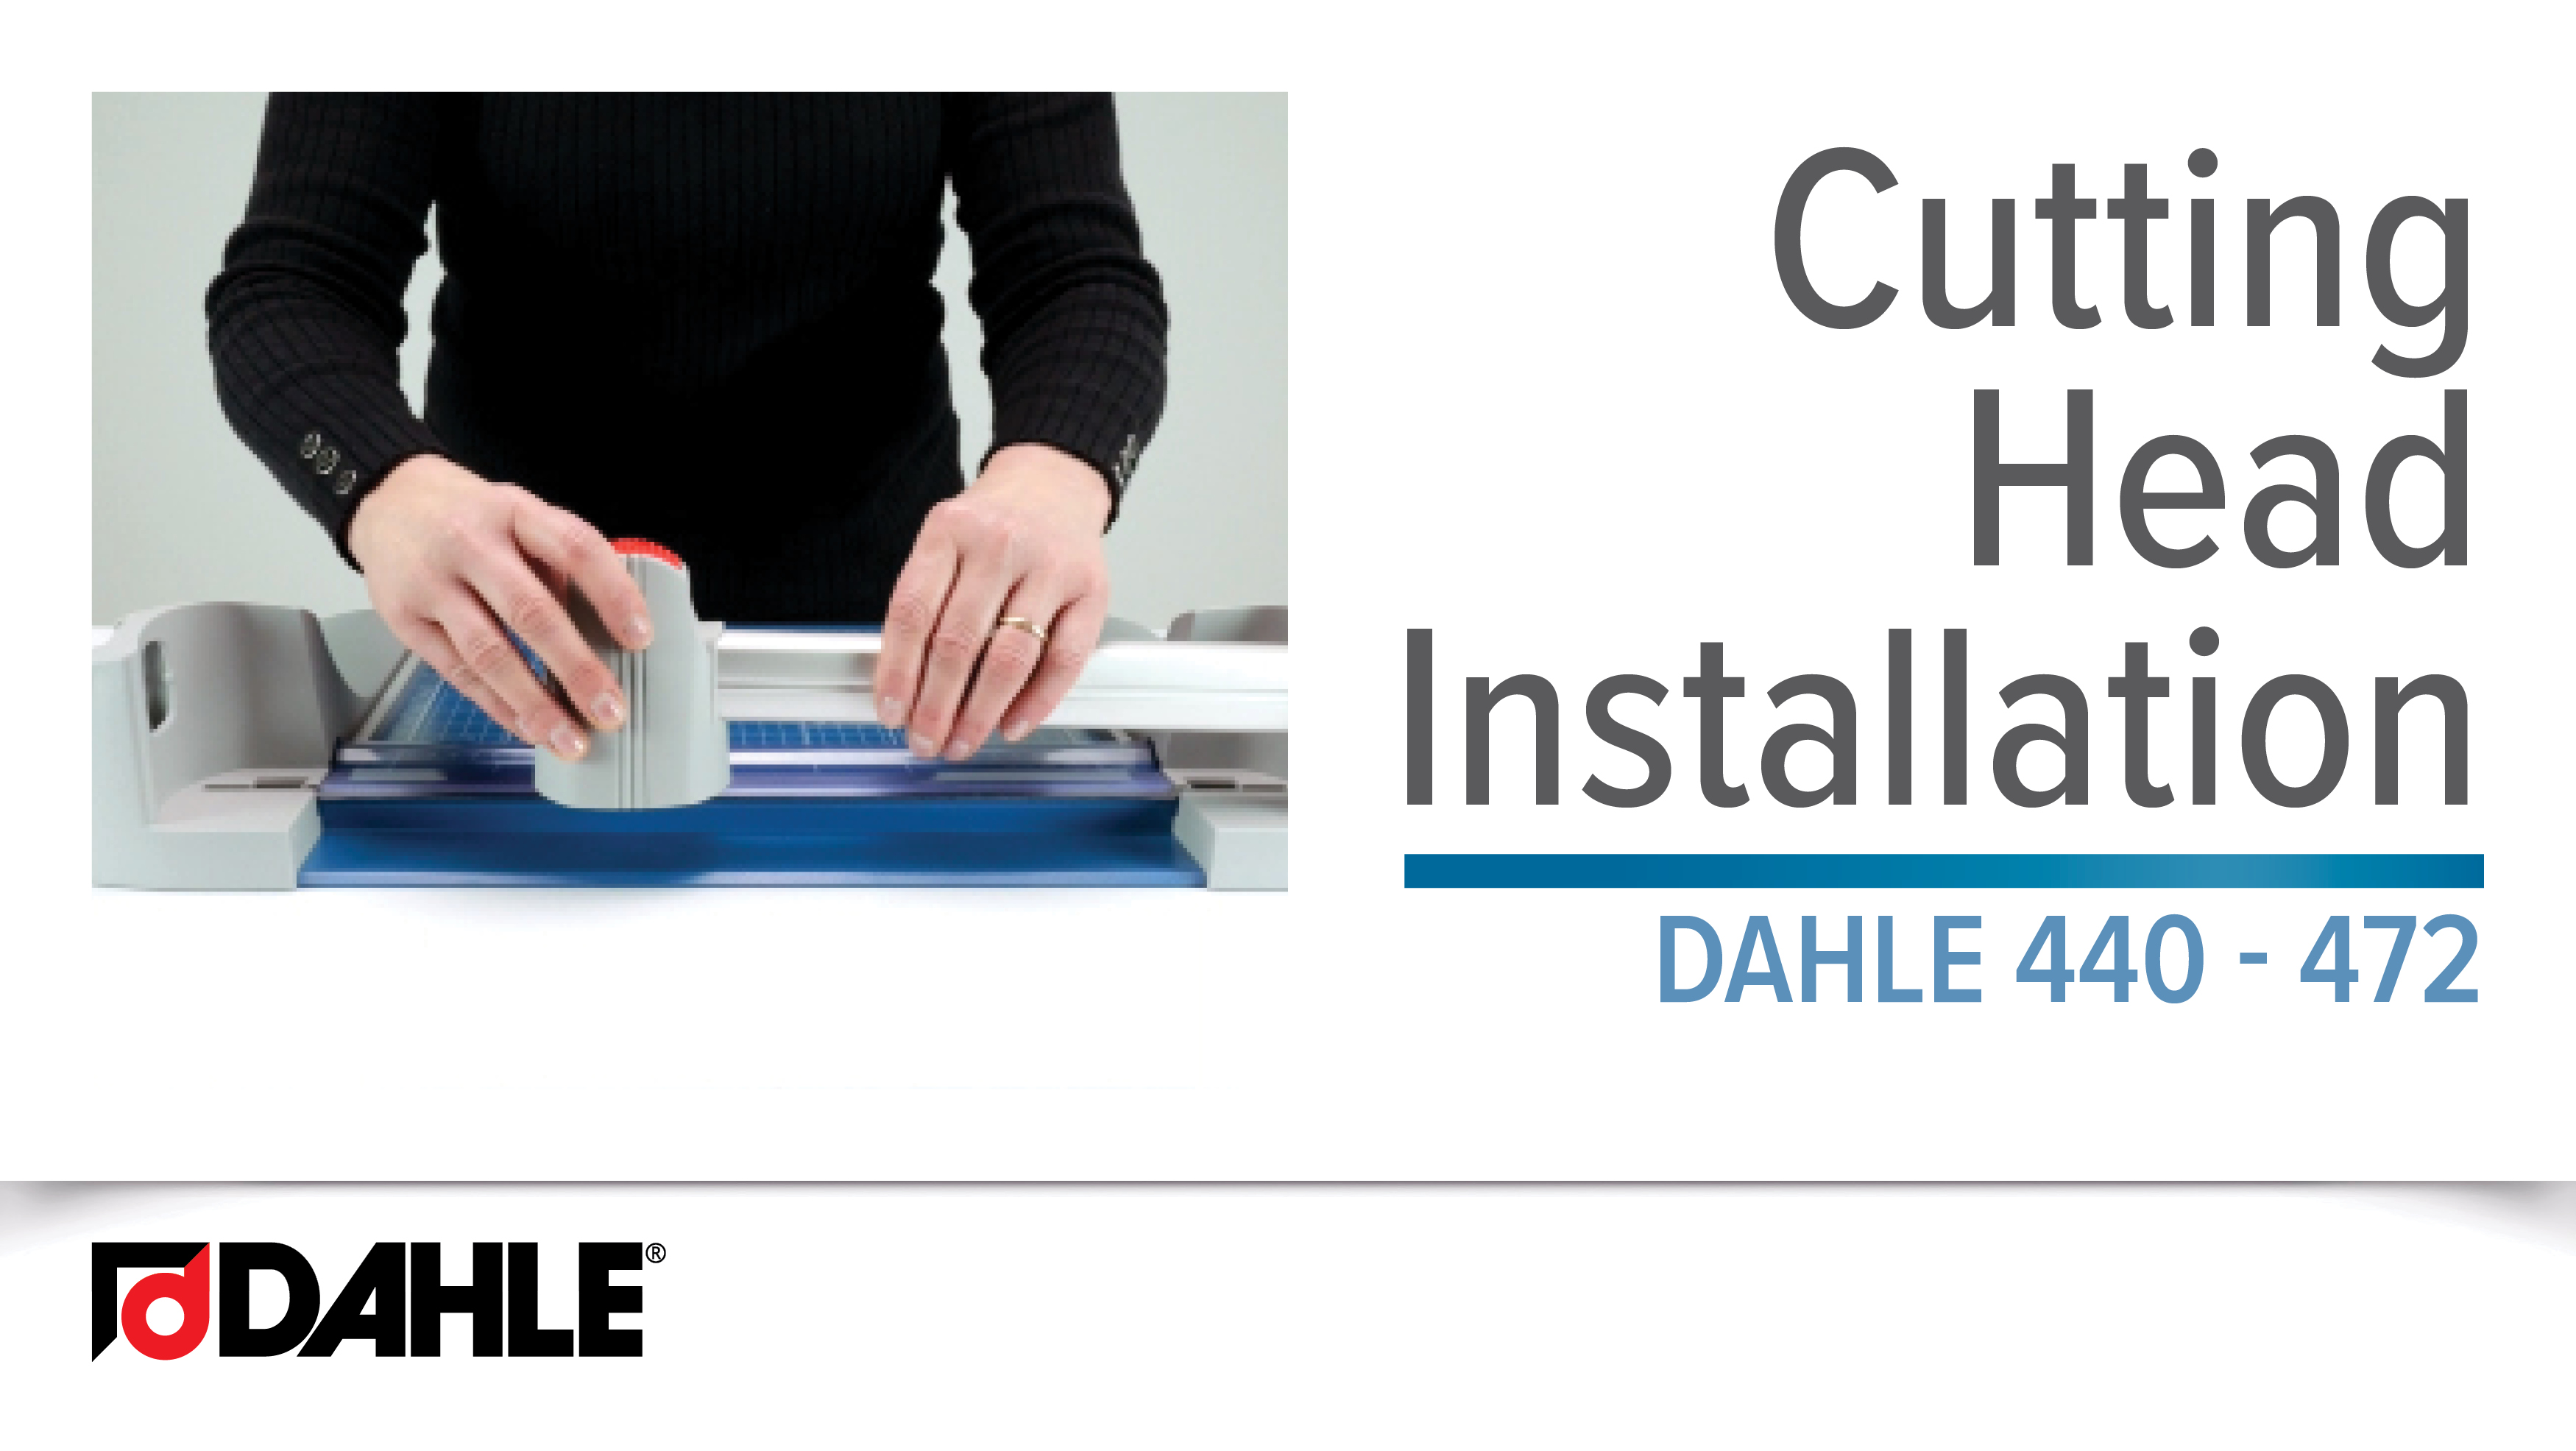 <big><strong>Dahle 440 - 472</strong></big> 
<br>Premium Series